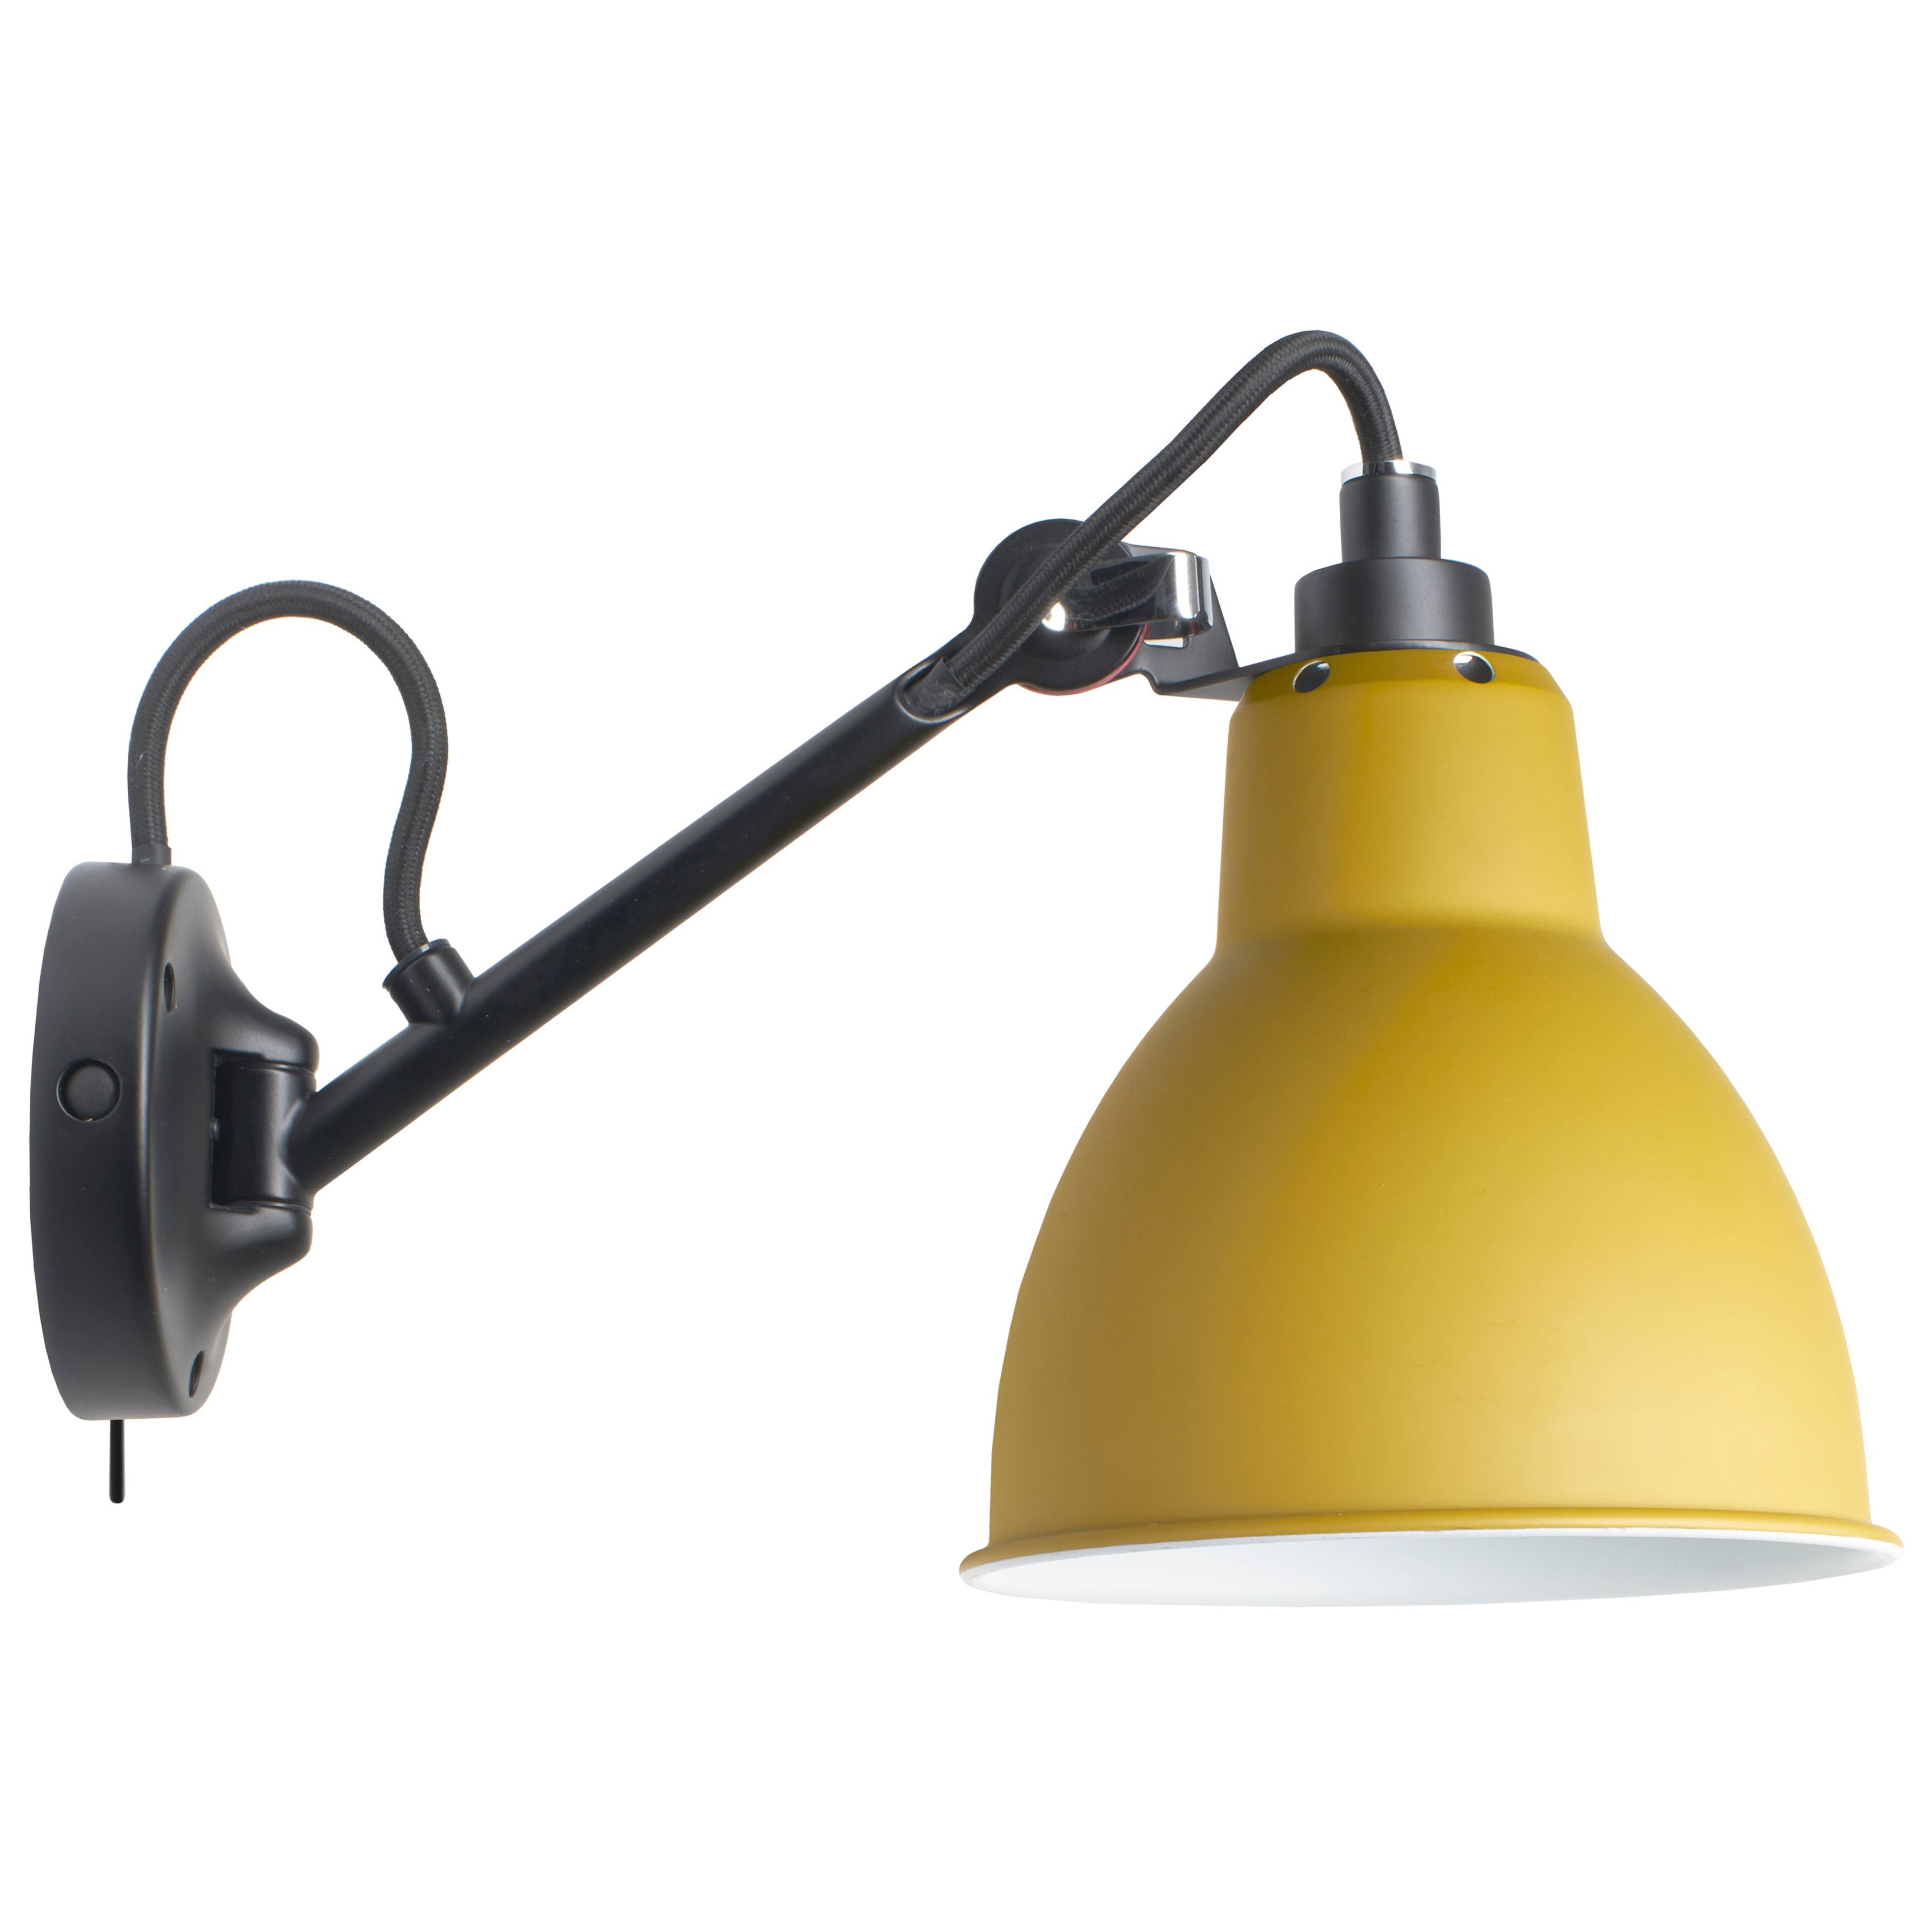 DCW Editions La Lampe Gras N°104 SW Wall Lamp in Black Arm and Yellow Shade For Sale